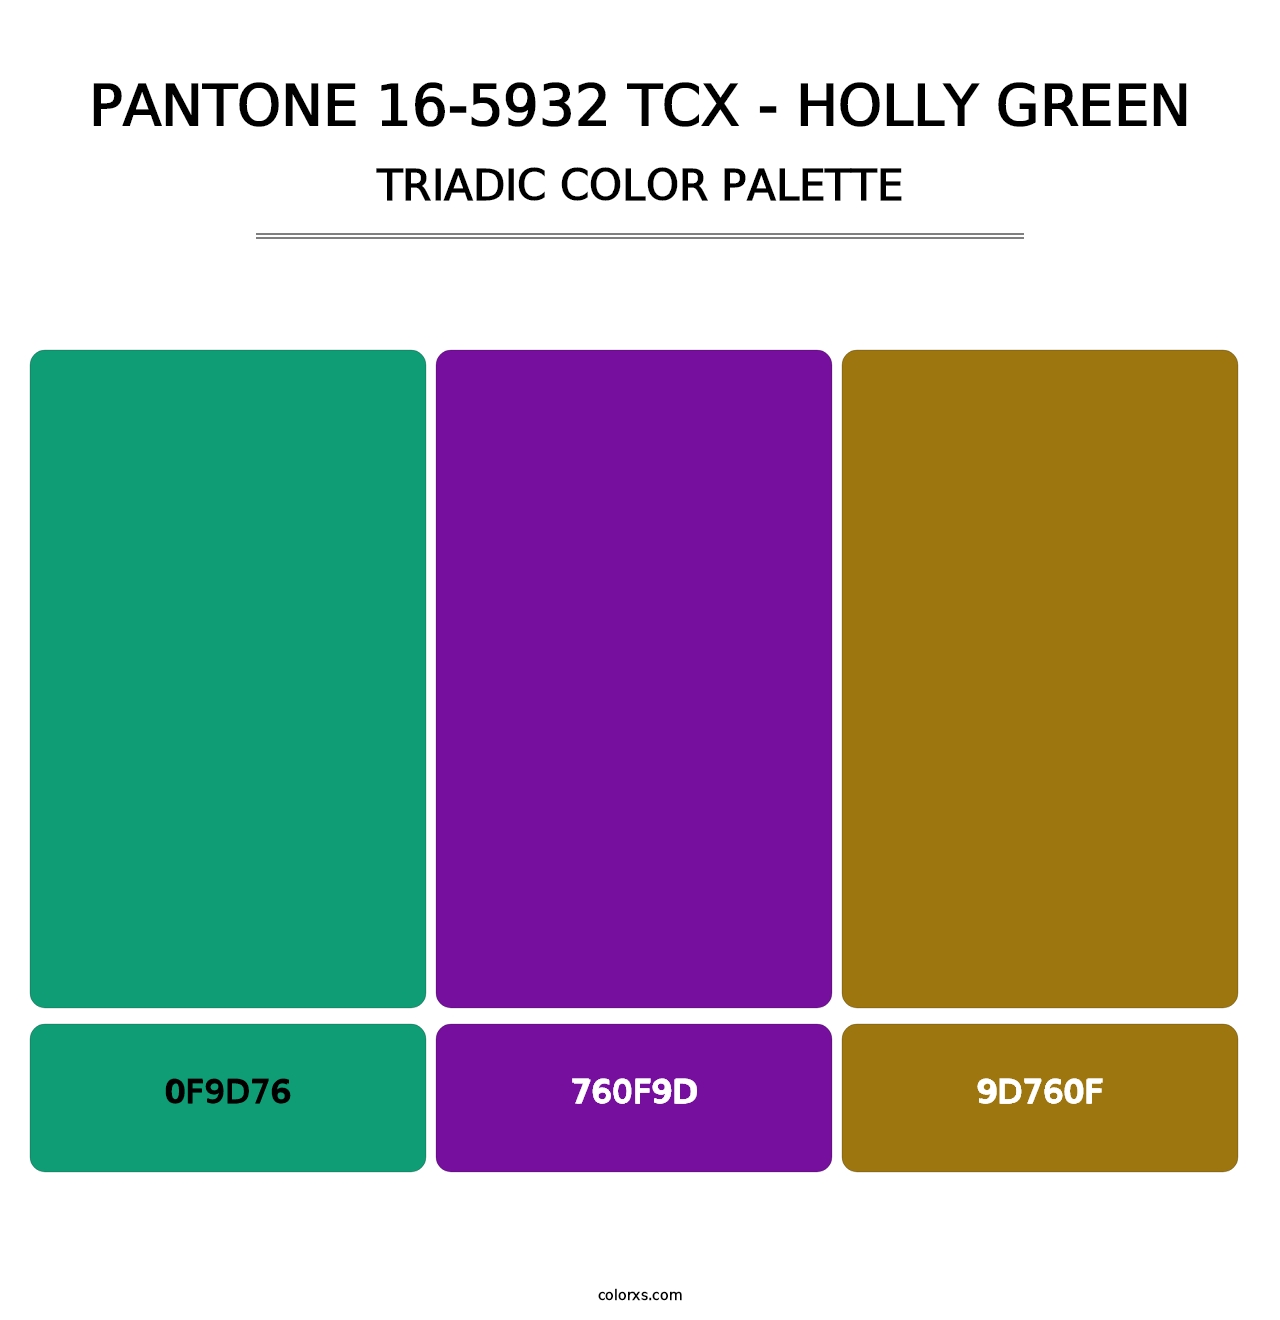 PANTONE 16-5932 TCX - Holly Green - Triadic Color Palette